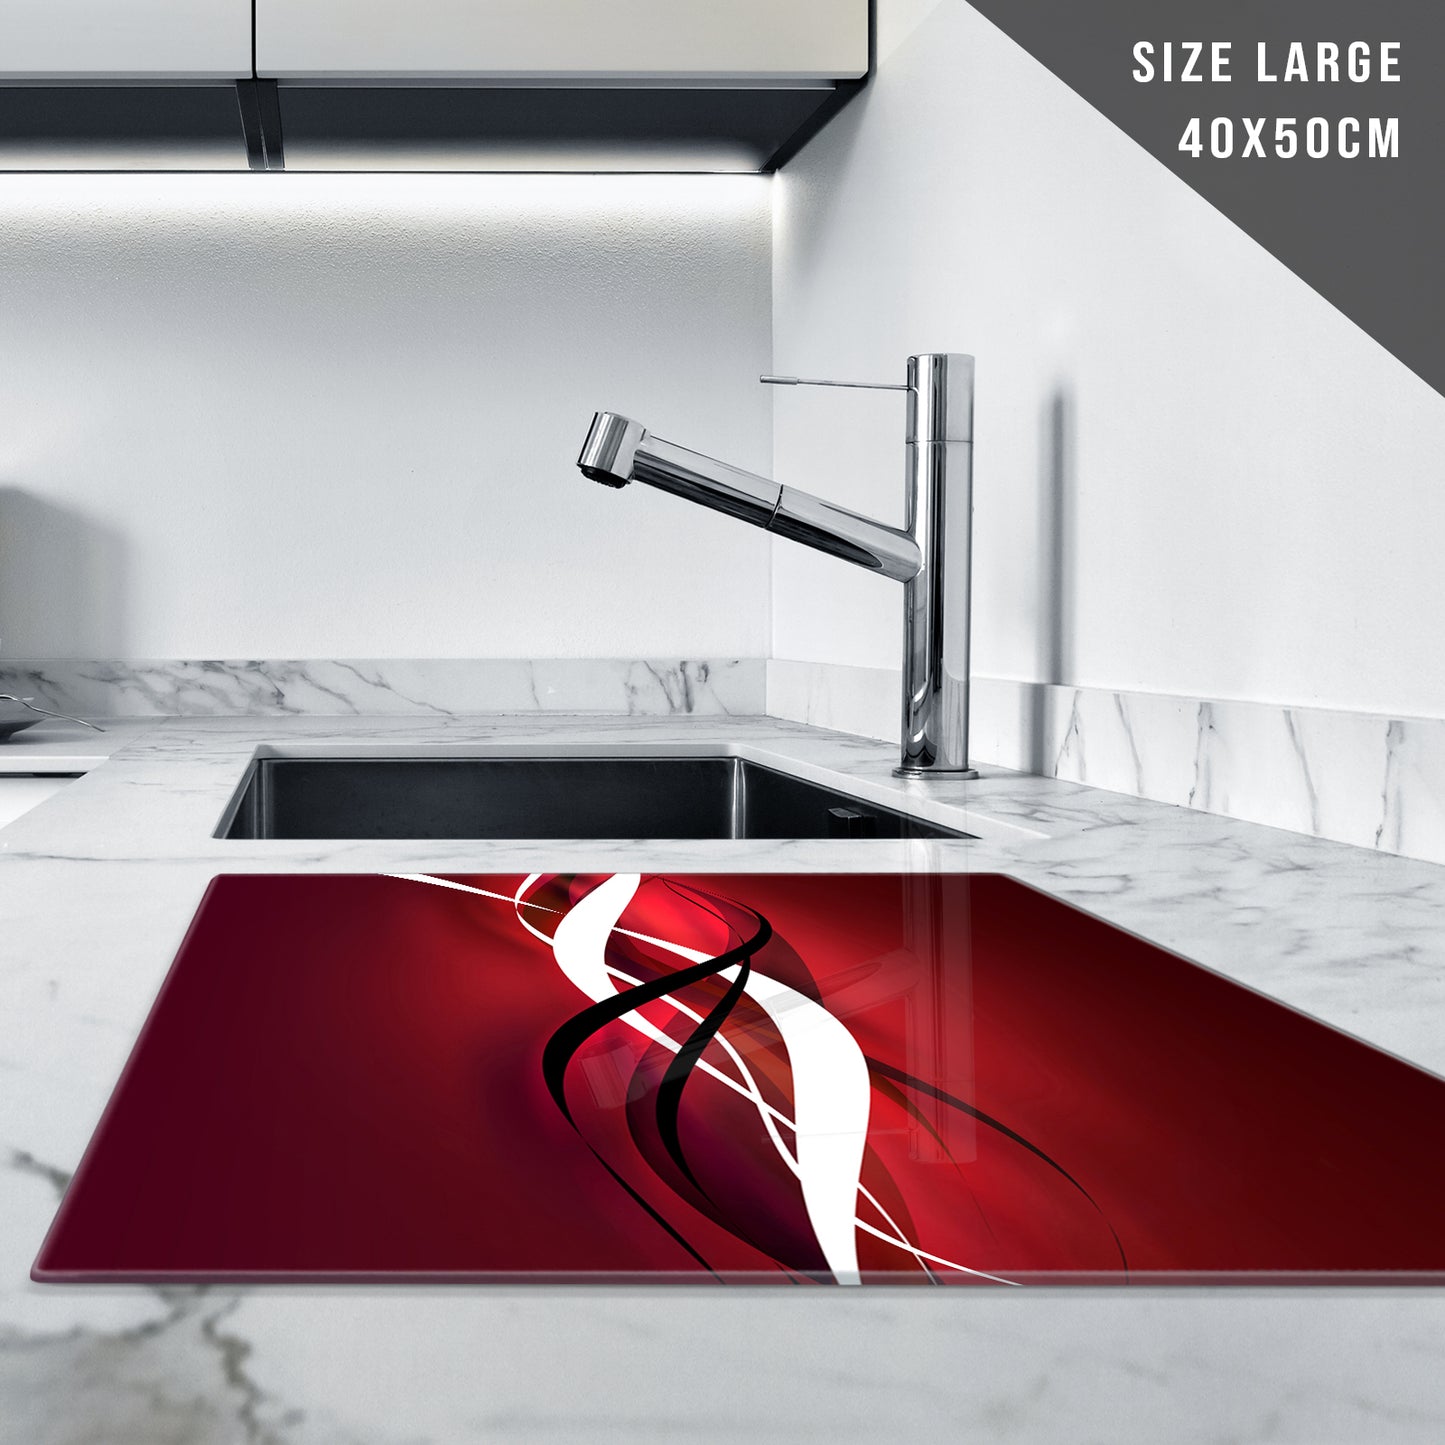 Glass Chopping Board for Kitchen in Red Black White Design